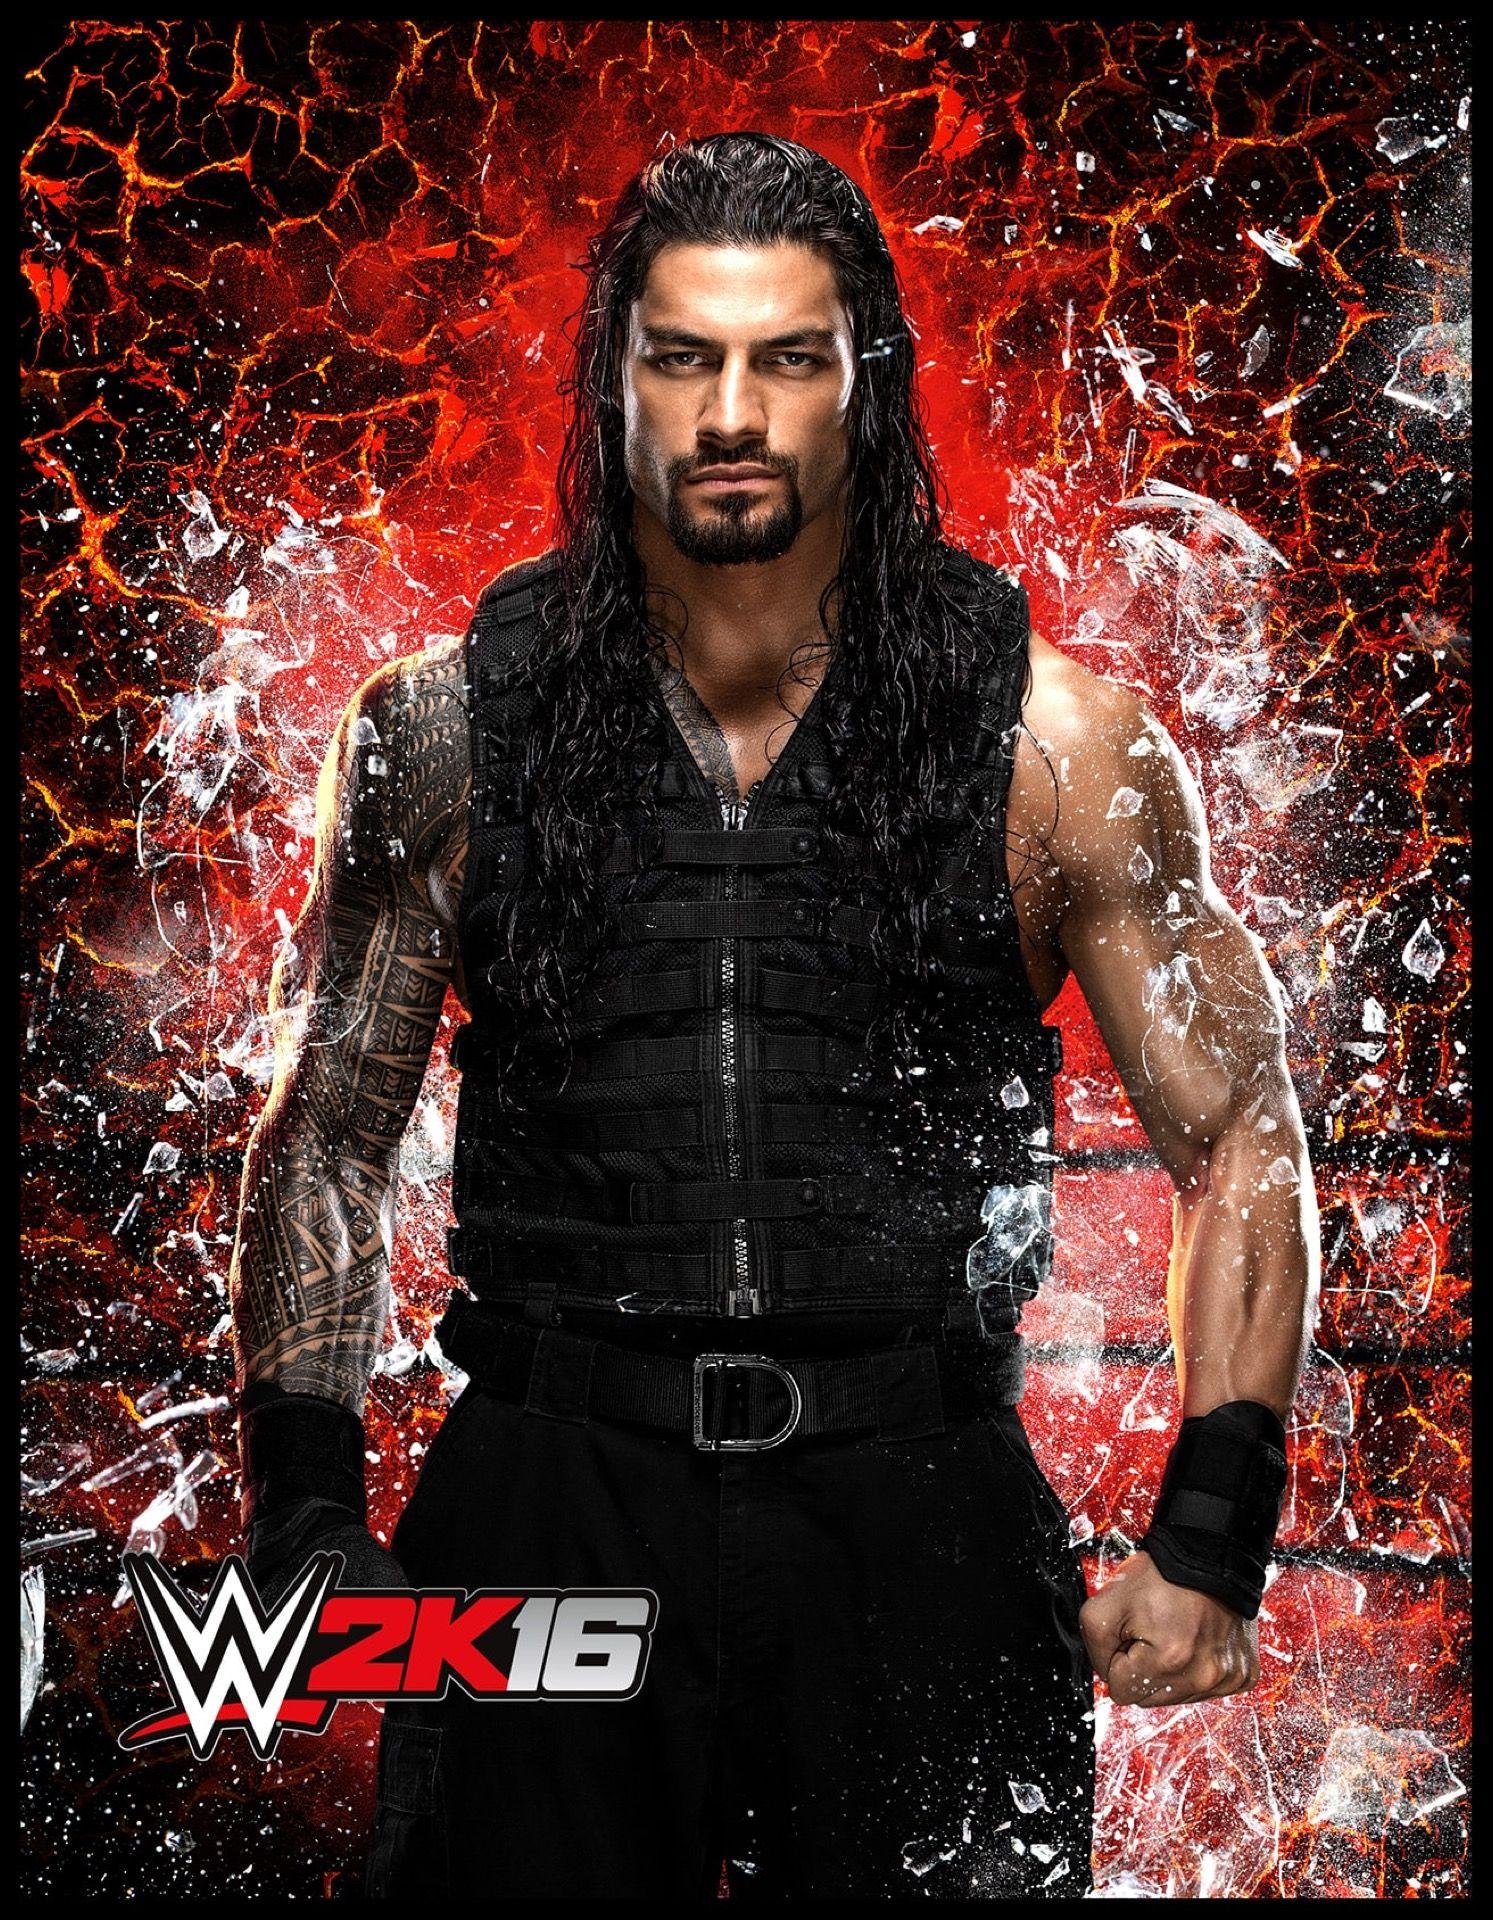 See screenshots of WWE 2K16: Browse dozens of high resolution image